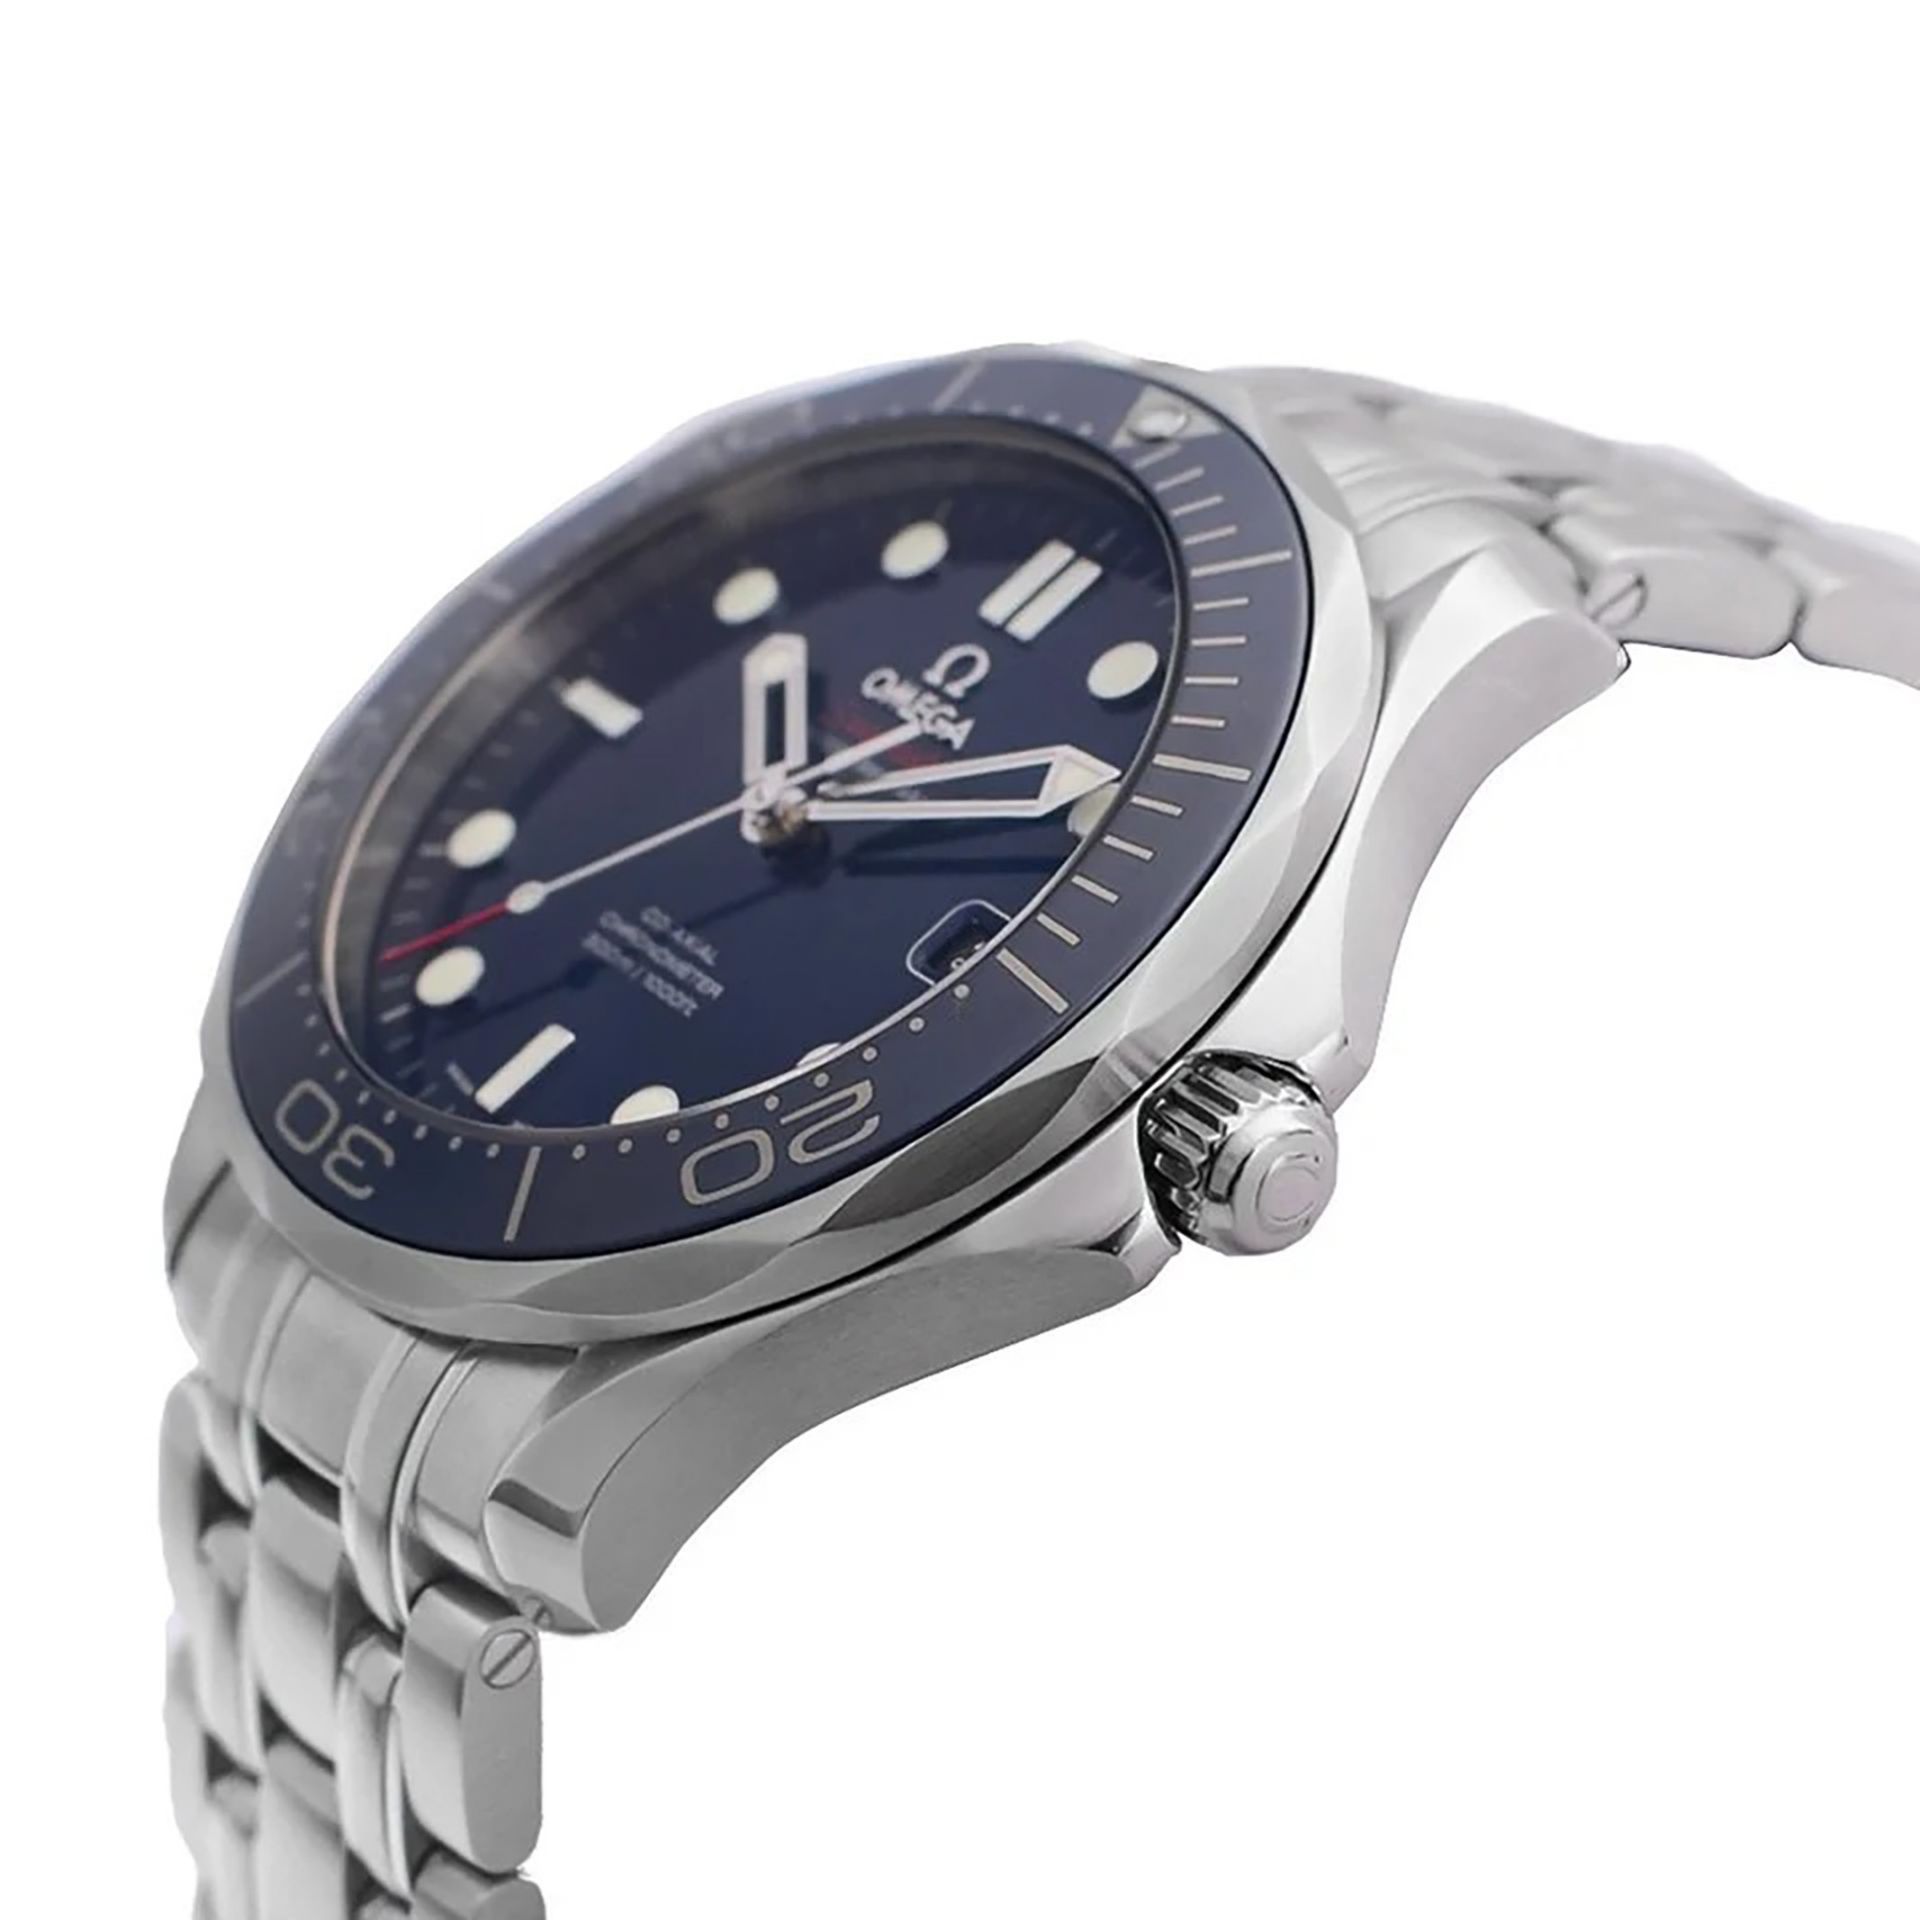 Omega Seamaster Diver 300 M wristwatch, in stainless steel - Image 2 of 6